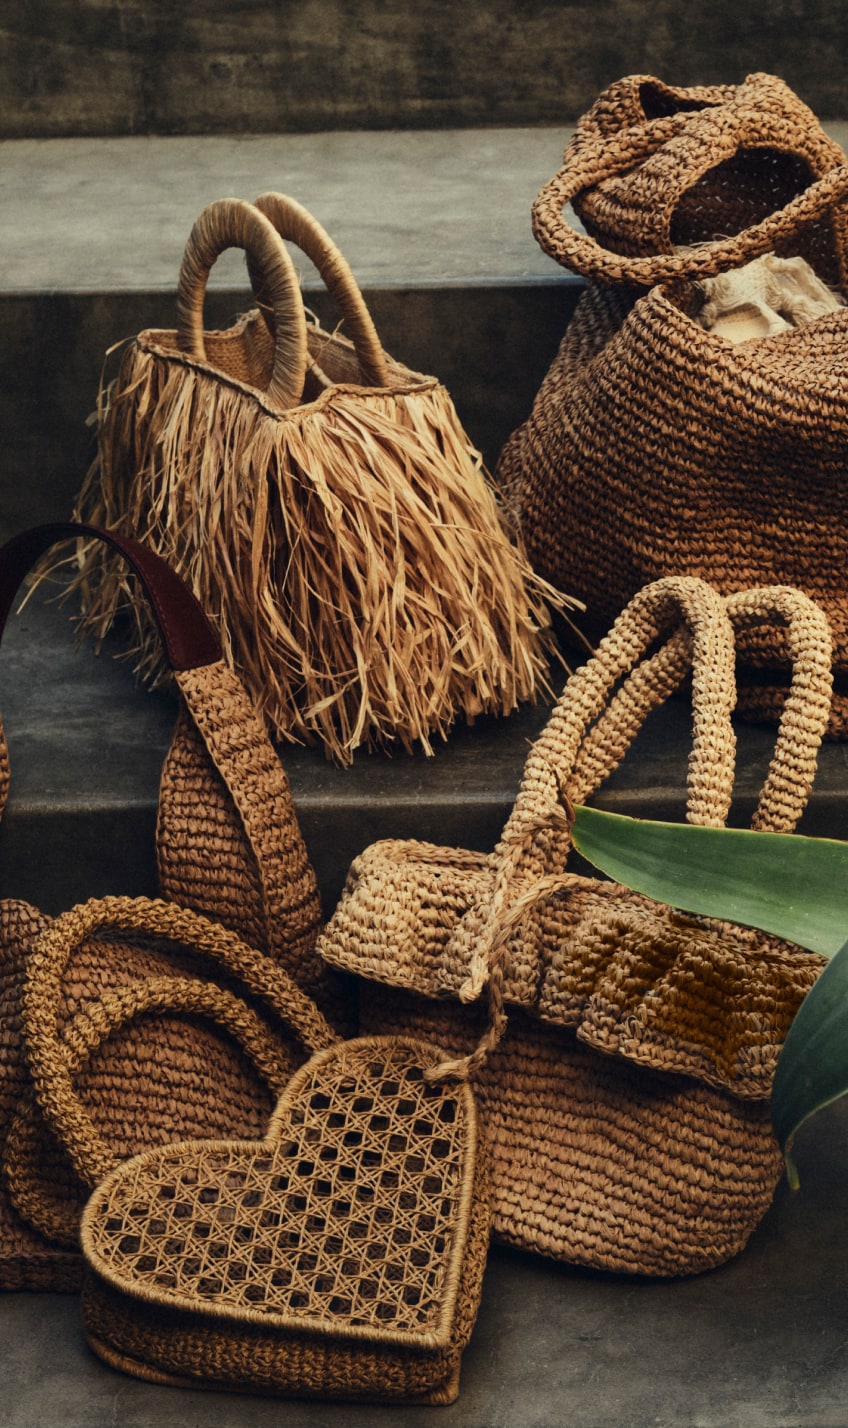 Straw bags we love